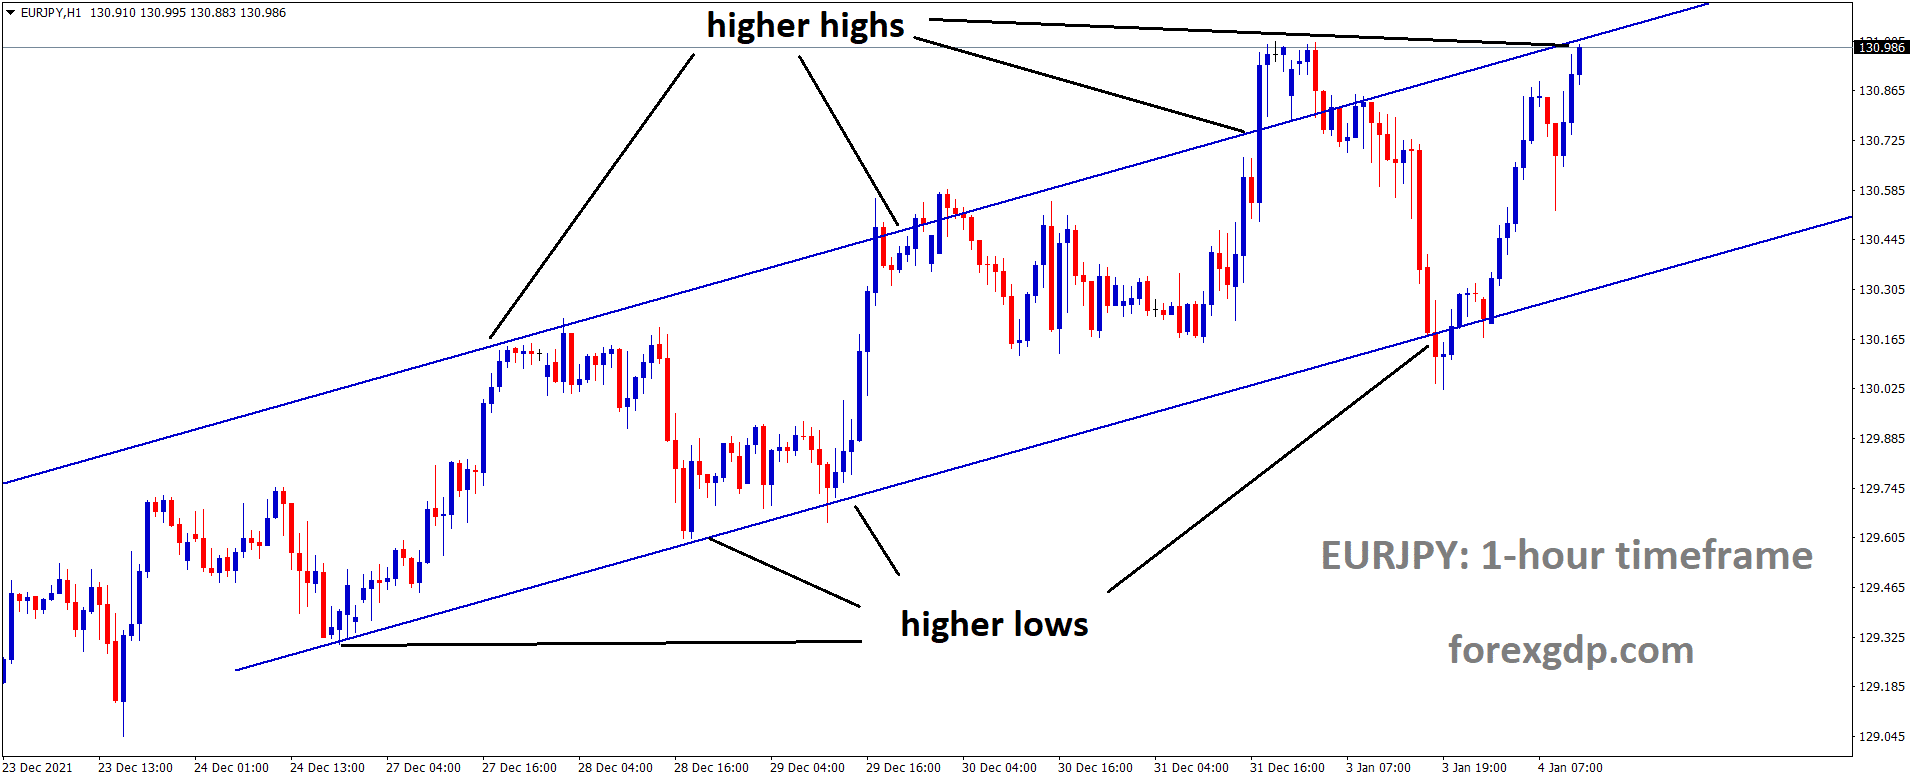 EURJPY is moving in an Ascending channel and the market has reached the higher high area of the channel